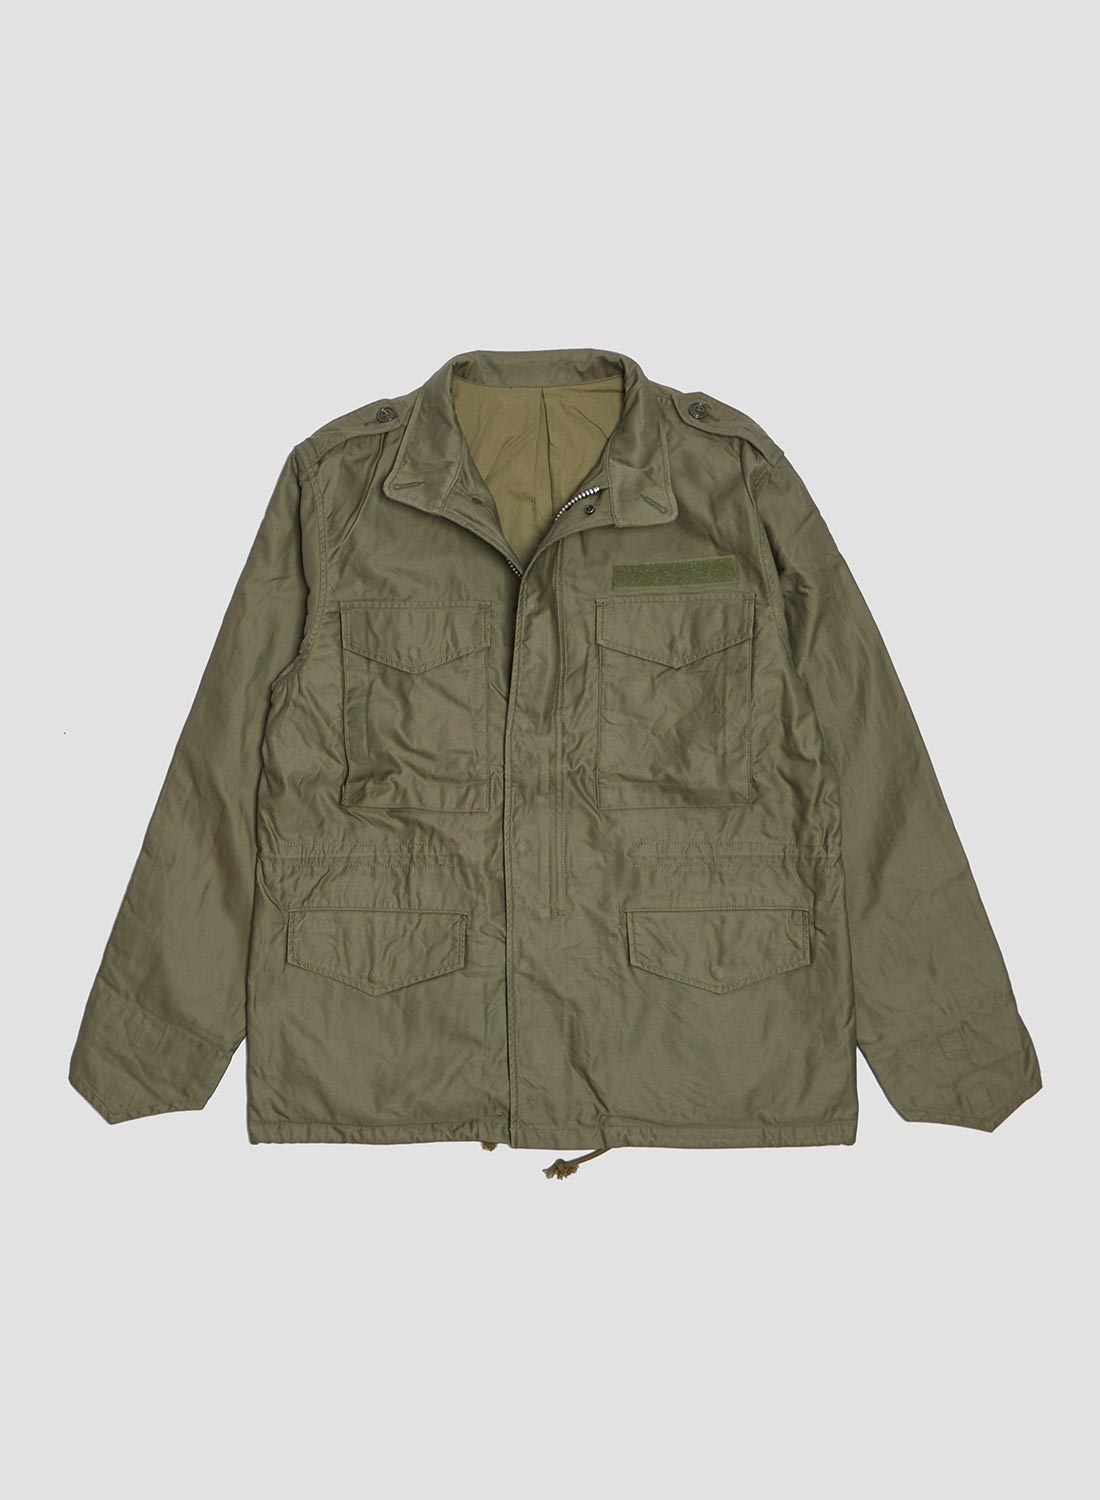 FOB Factory M-65 Field Jacket Olive - 1